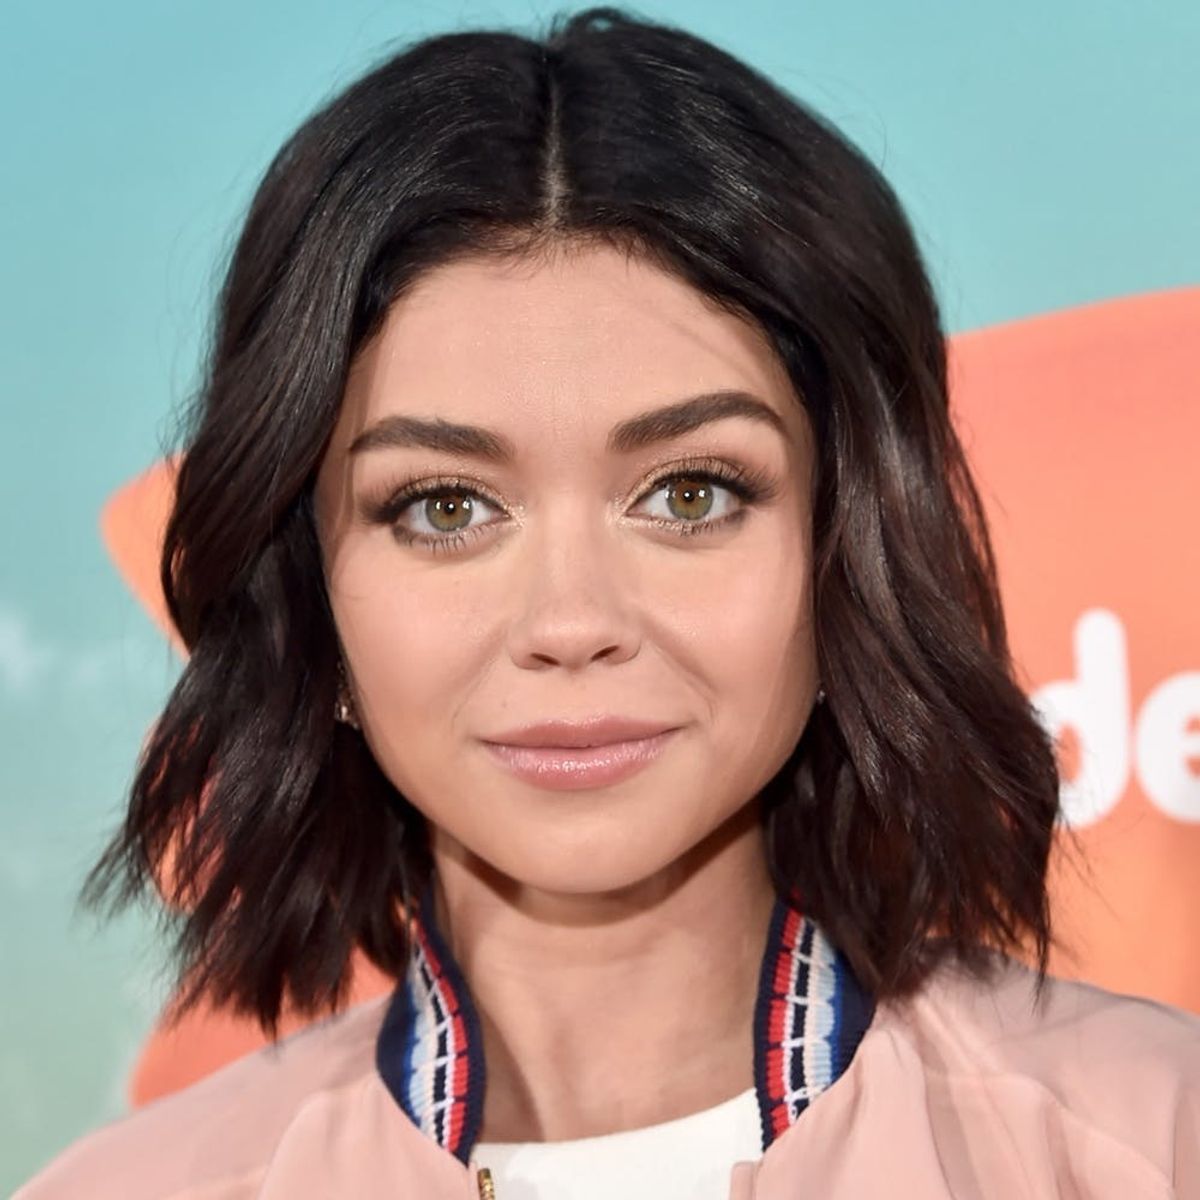 Sarah Hyland Just Got a Dirty Dancing Inspired Makeover